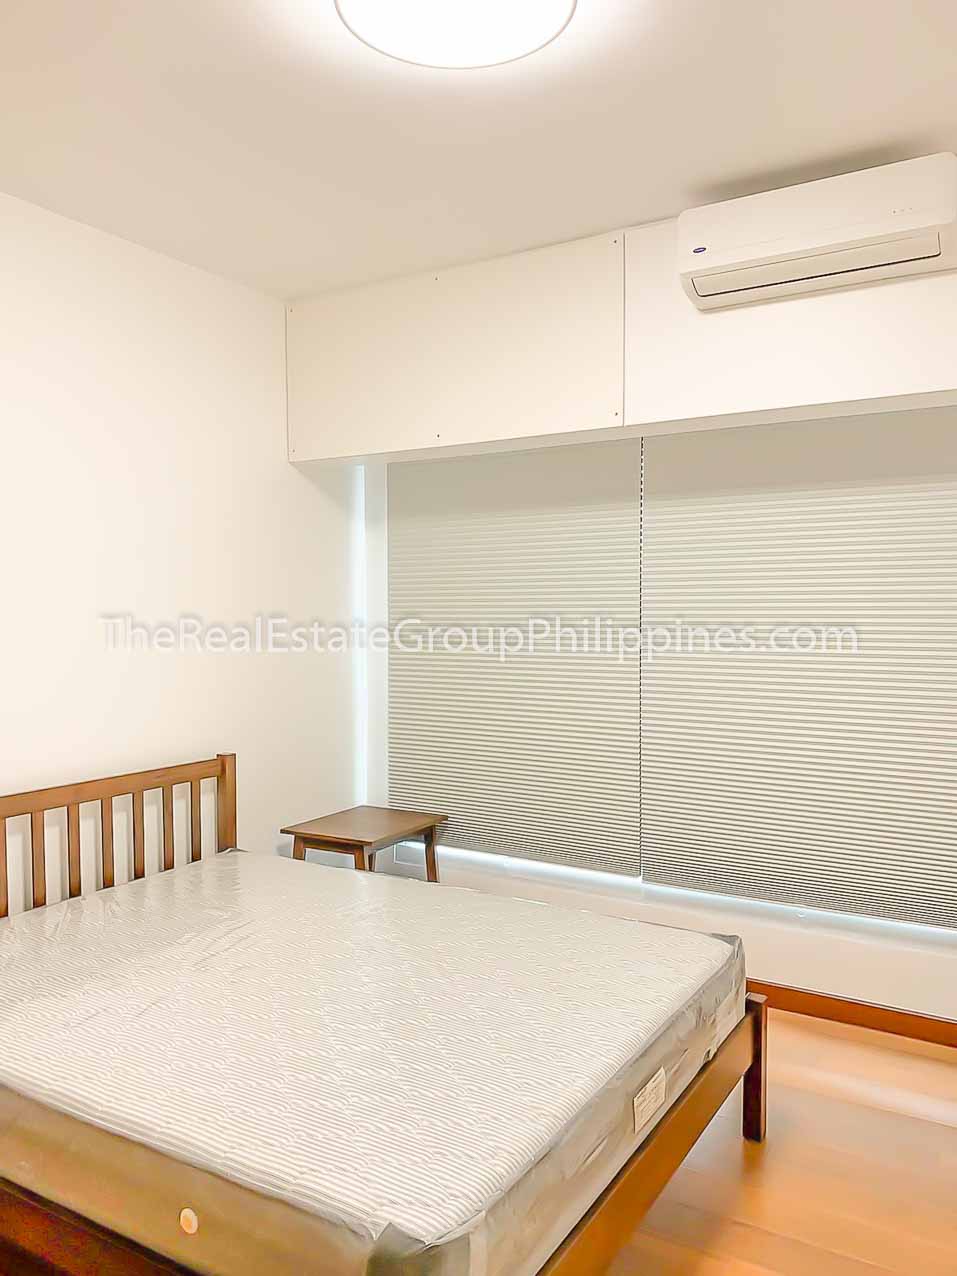 2BR Condo For Rent, Royalton at Capitol Commons, Pasig (5 of 9)